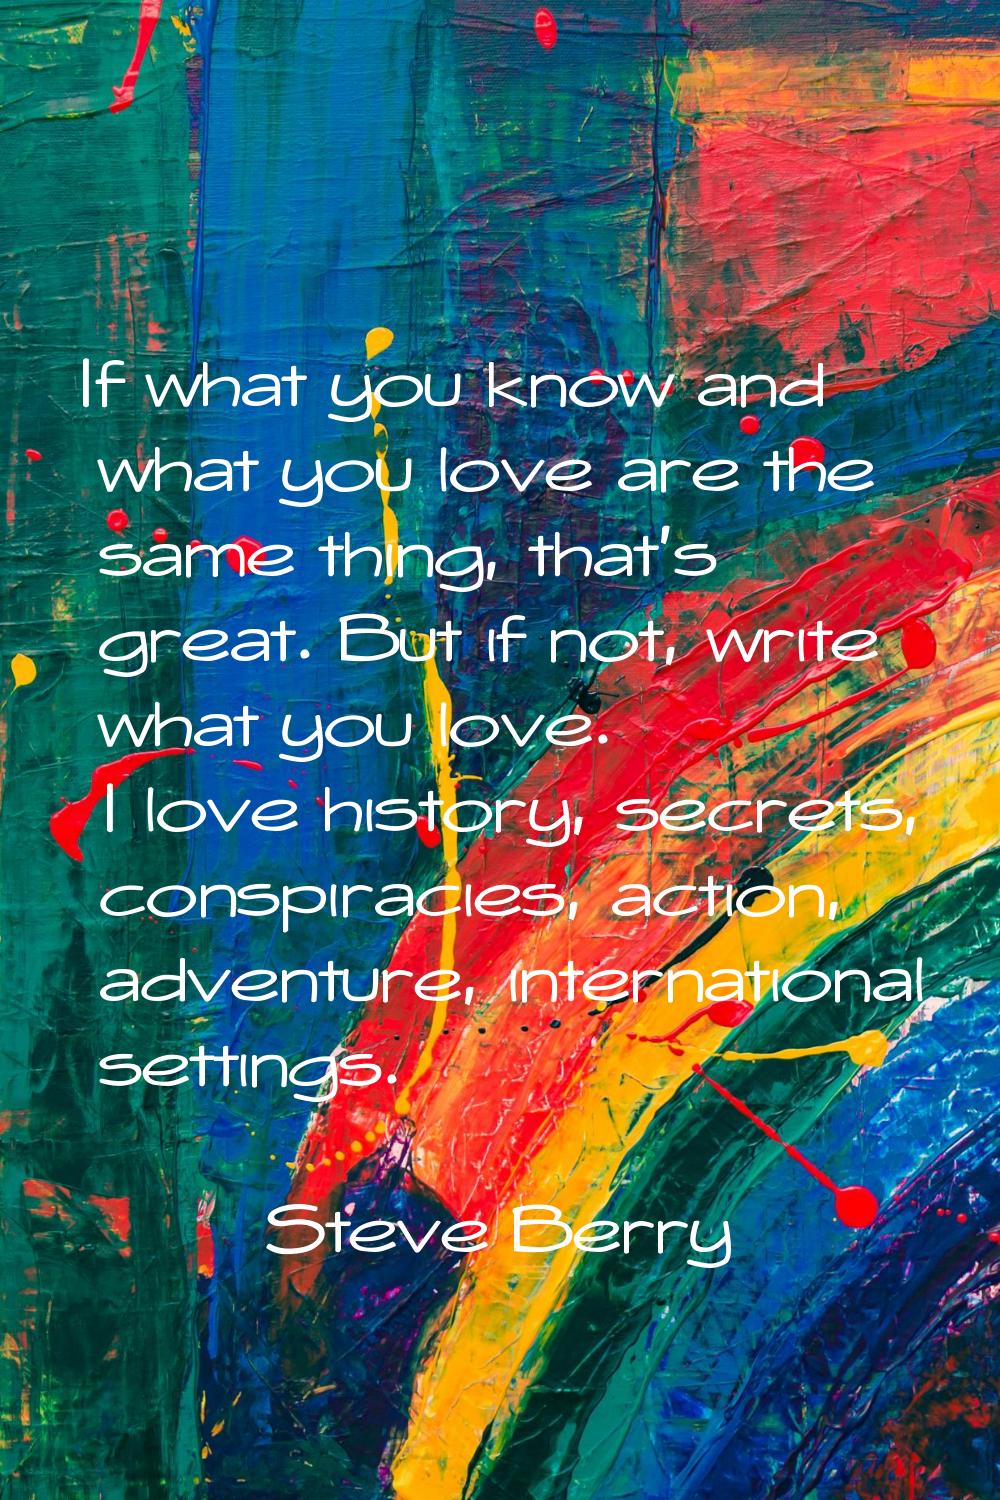 If what you know and what you love are the same thing, that's great. But if not, write what you lov